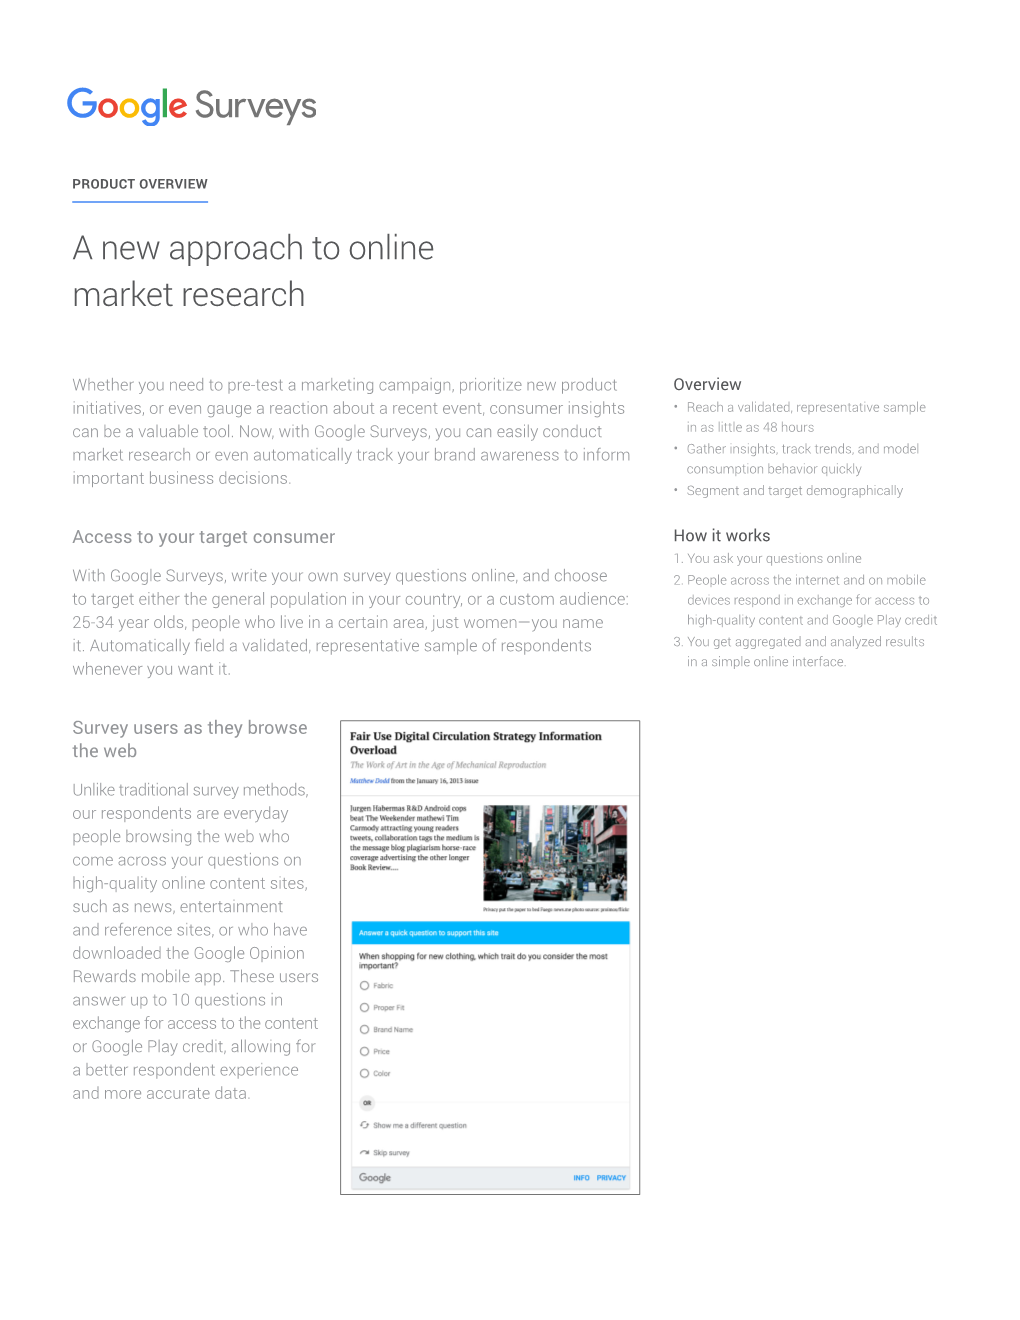 A New Approach to Online Market Research